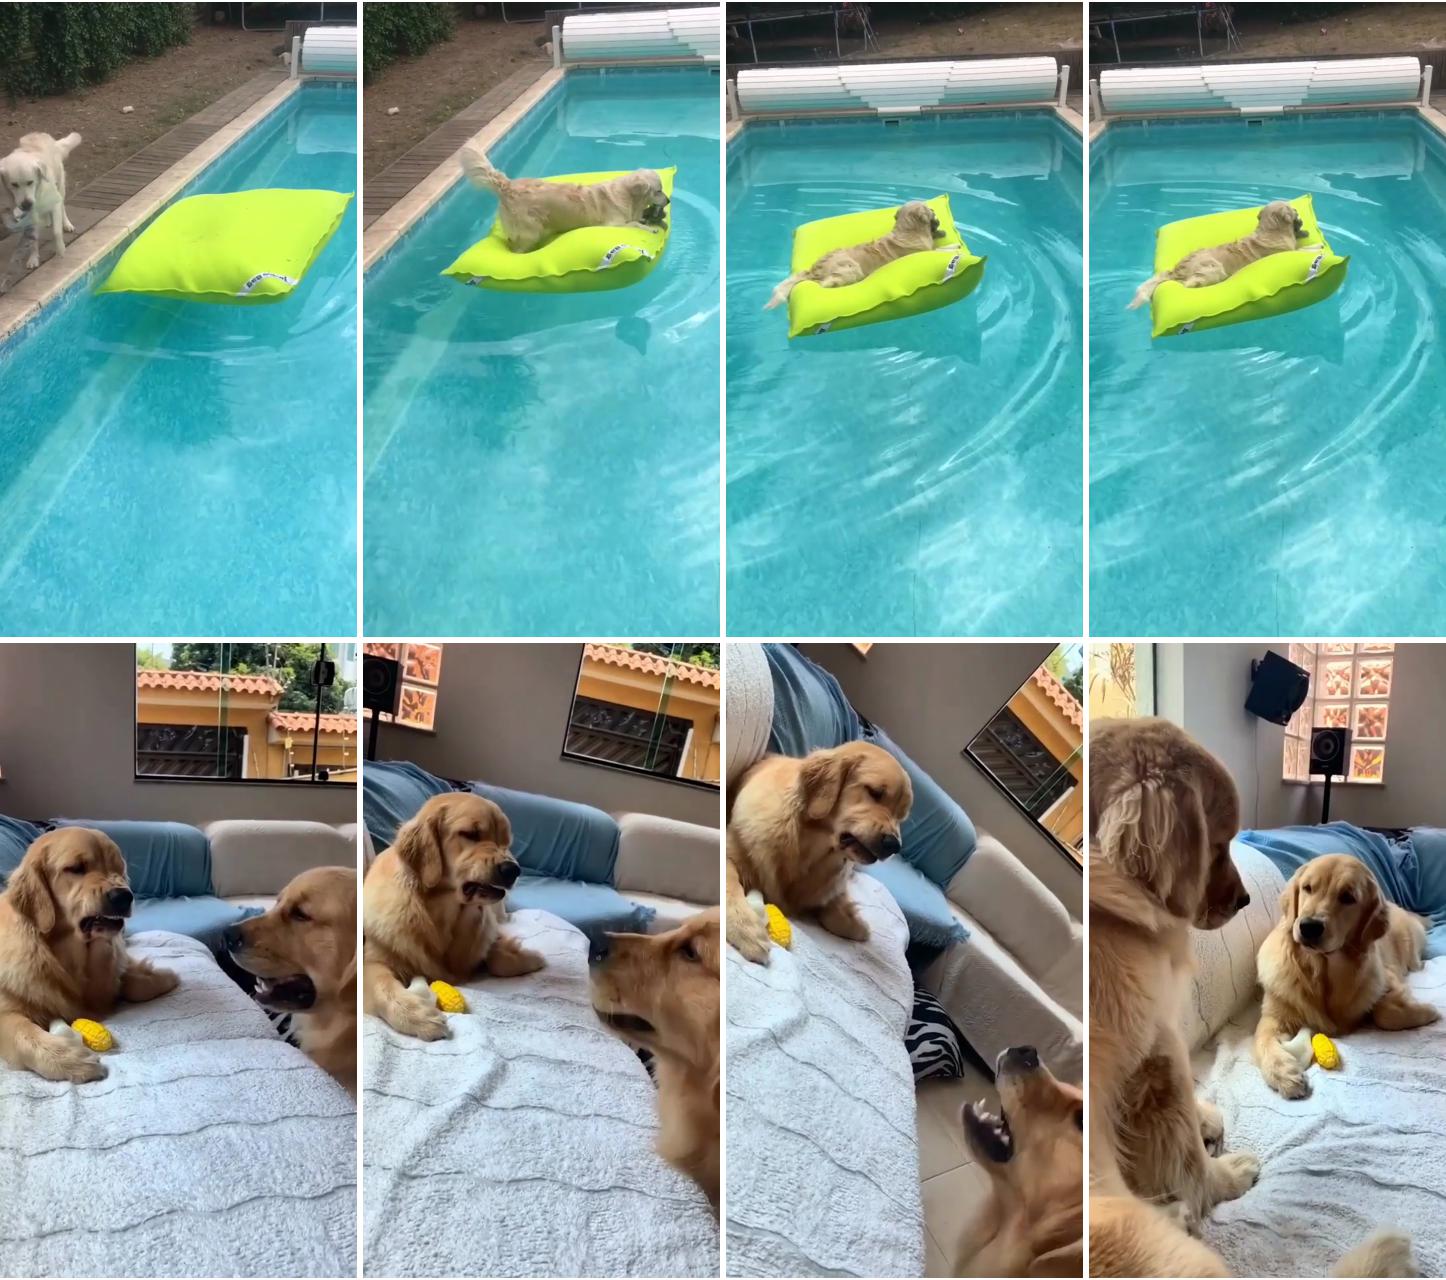 Hard life for dog in the pool; his face the entire time